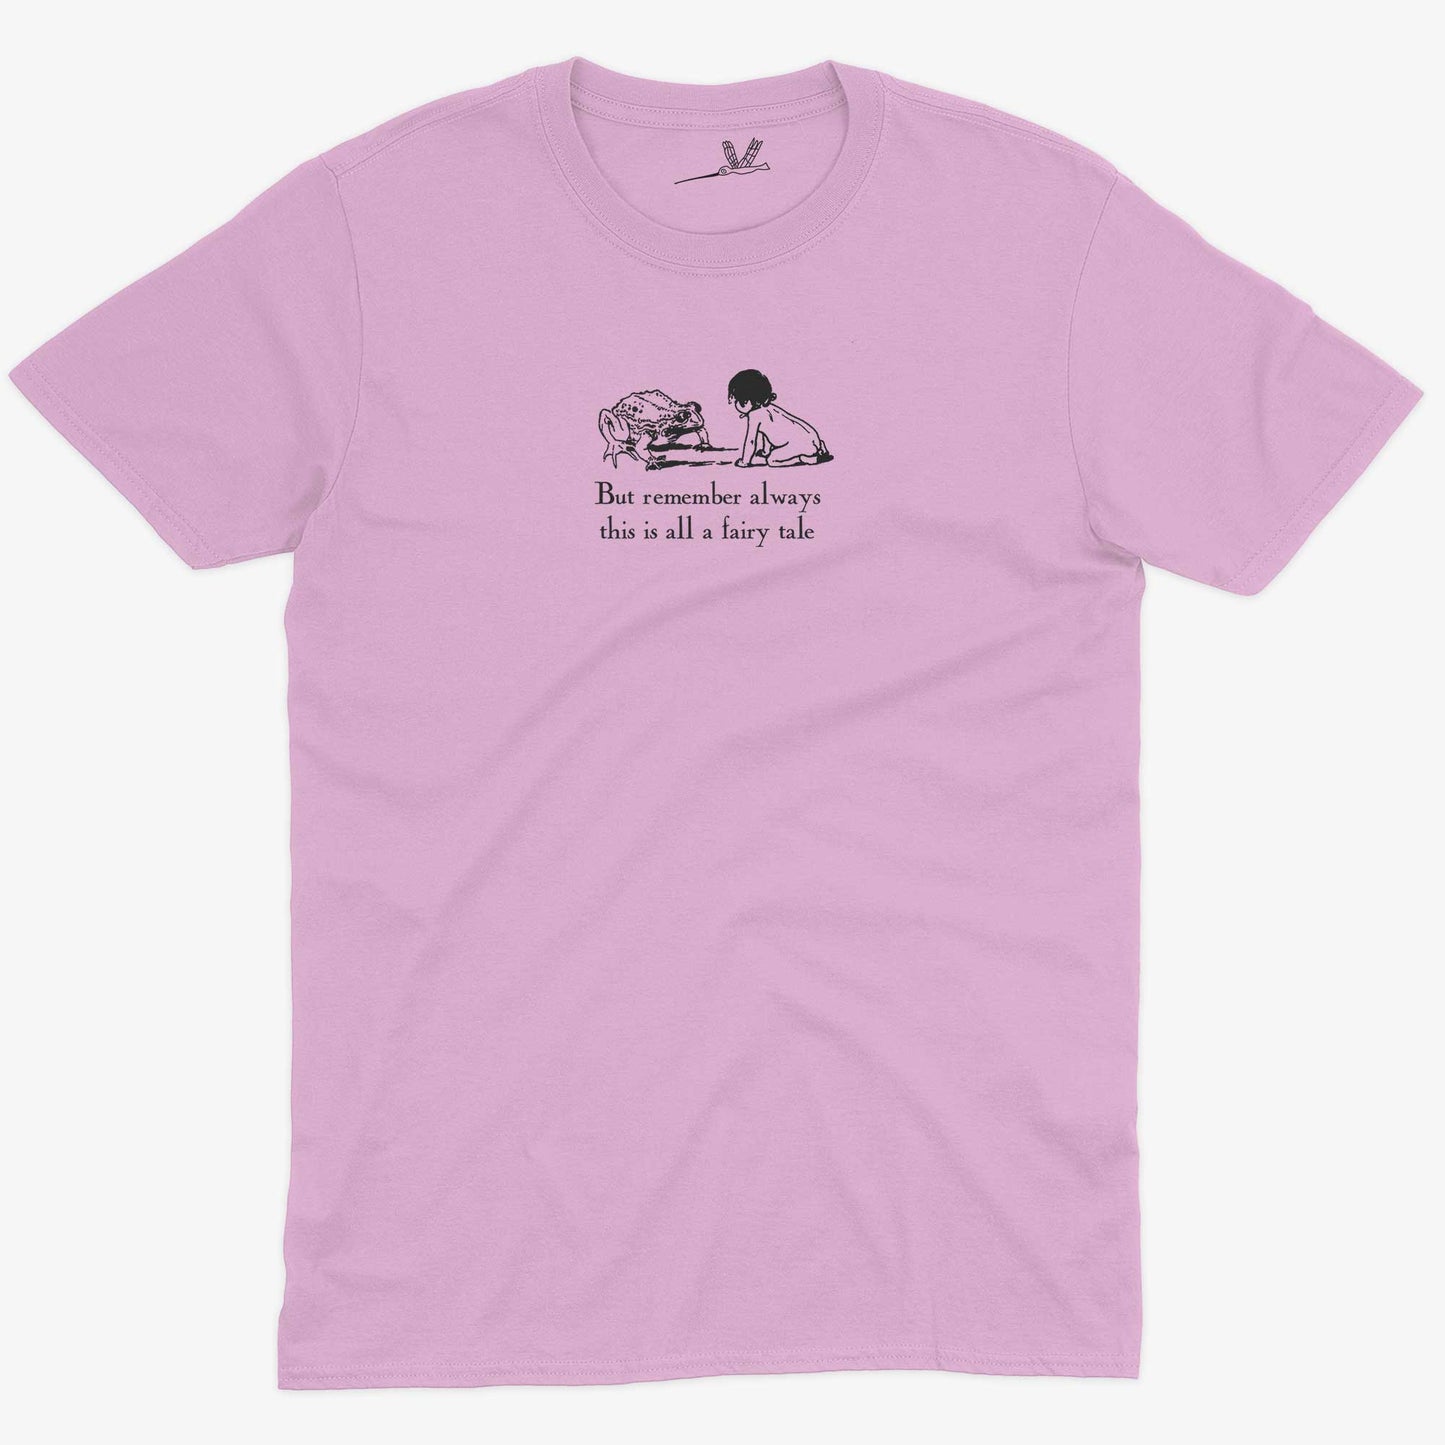 But remember always this is all a fairy tale Unisex Or Women's Cotton T-shirt-Pink-Unisex